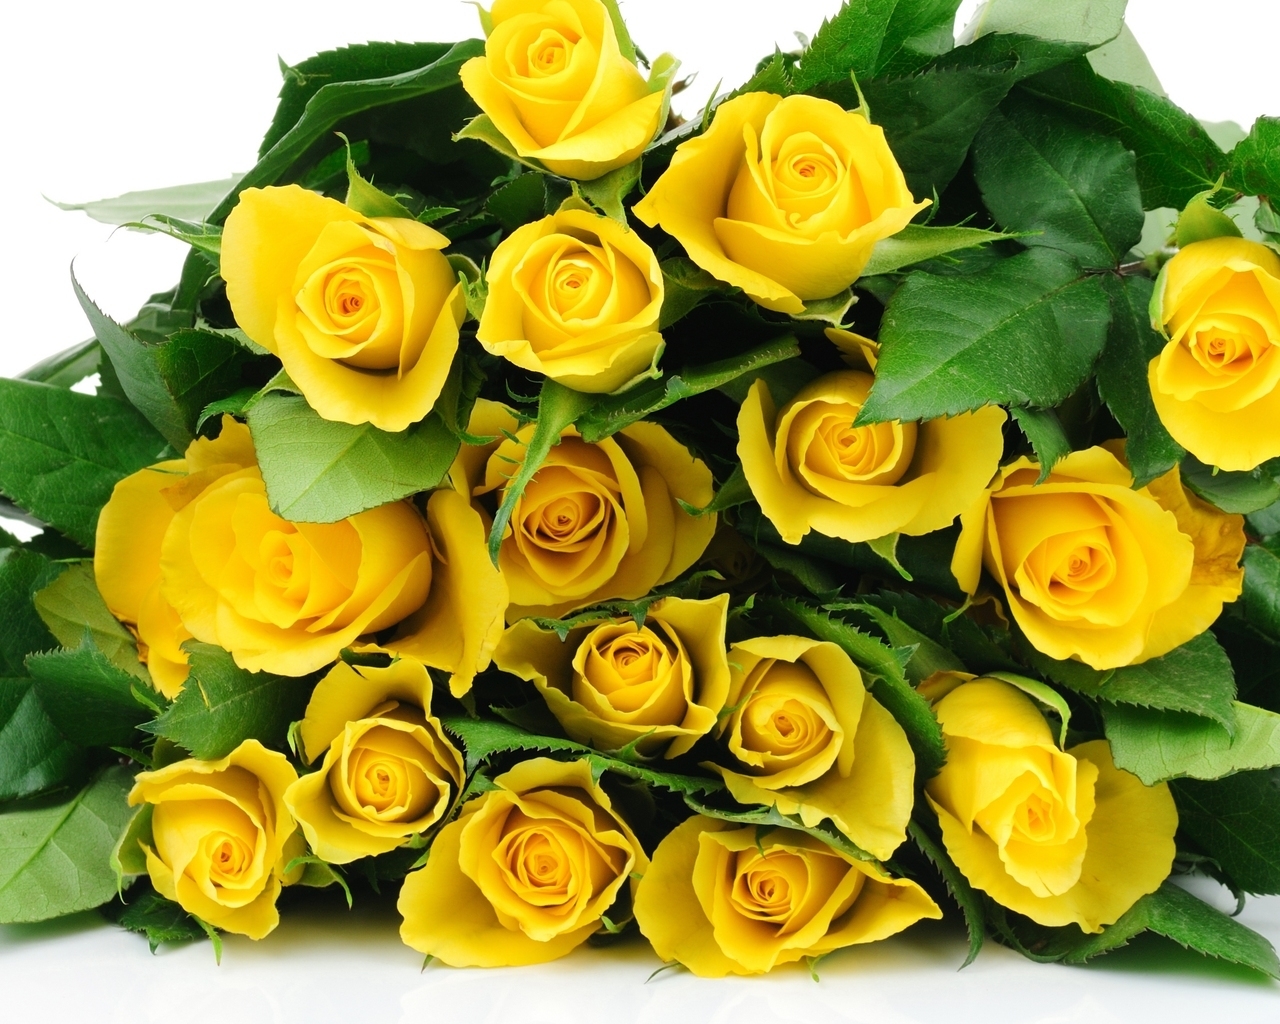 Yellow Roses Bucket for 1280 x 1024 resolution